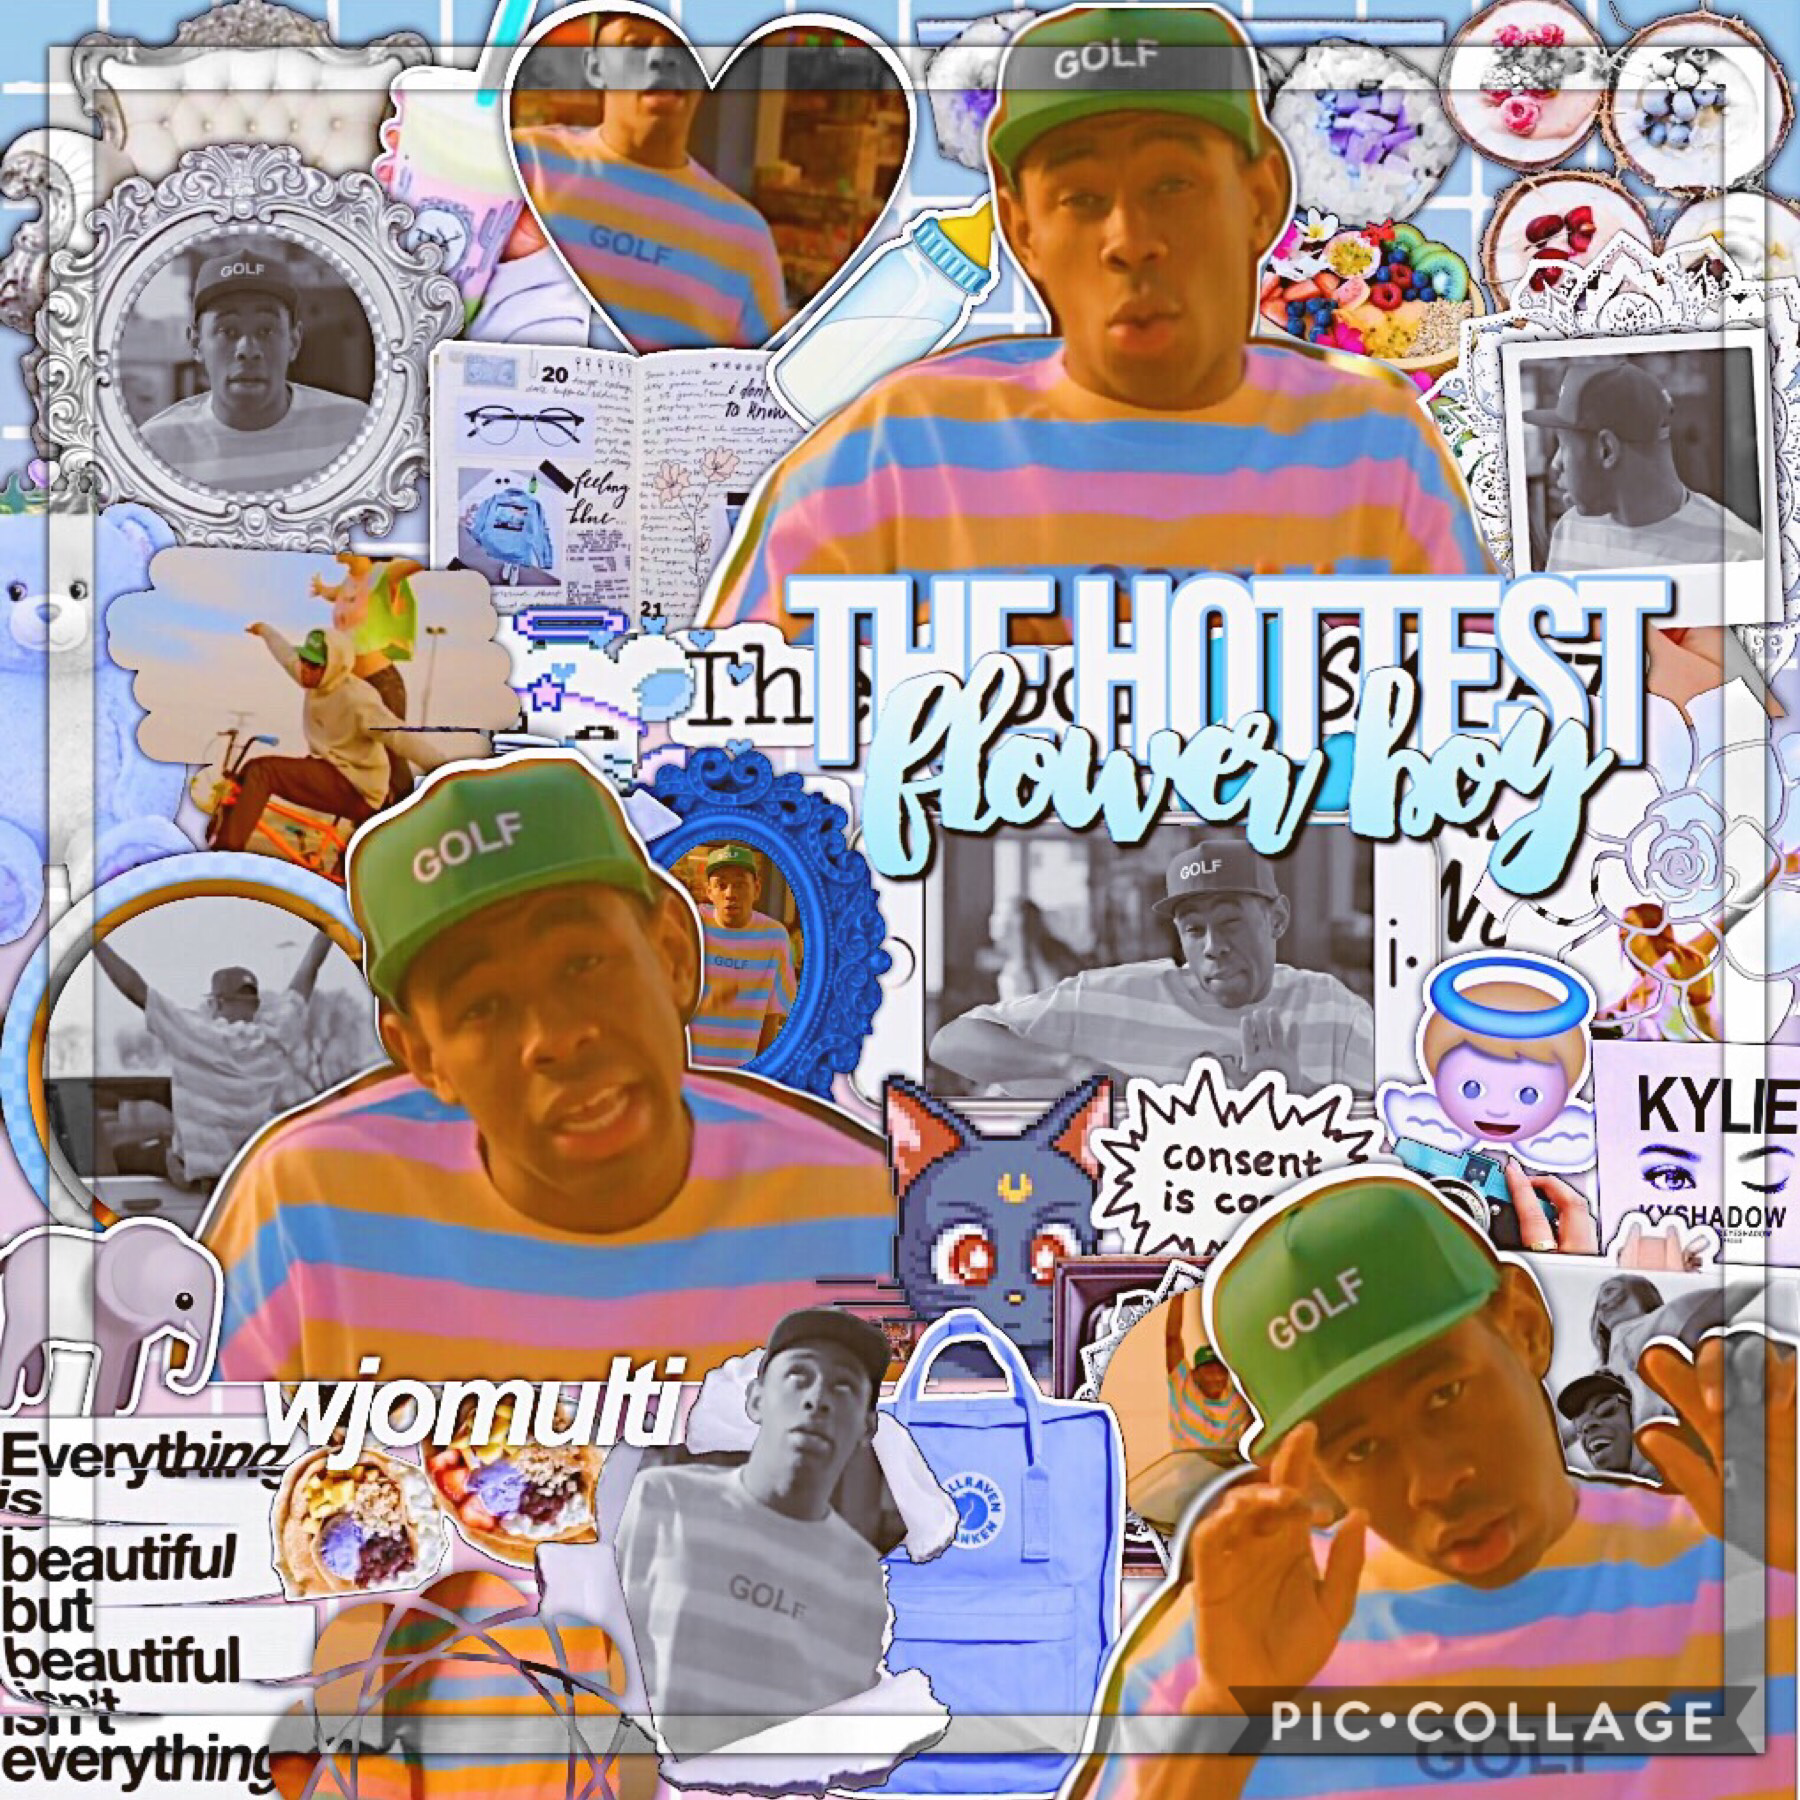 i actually like this edit and i love Tyler sfm ahhh 💘💓😤